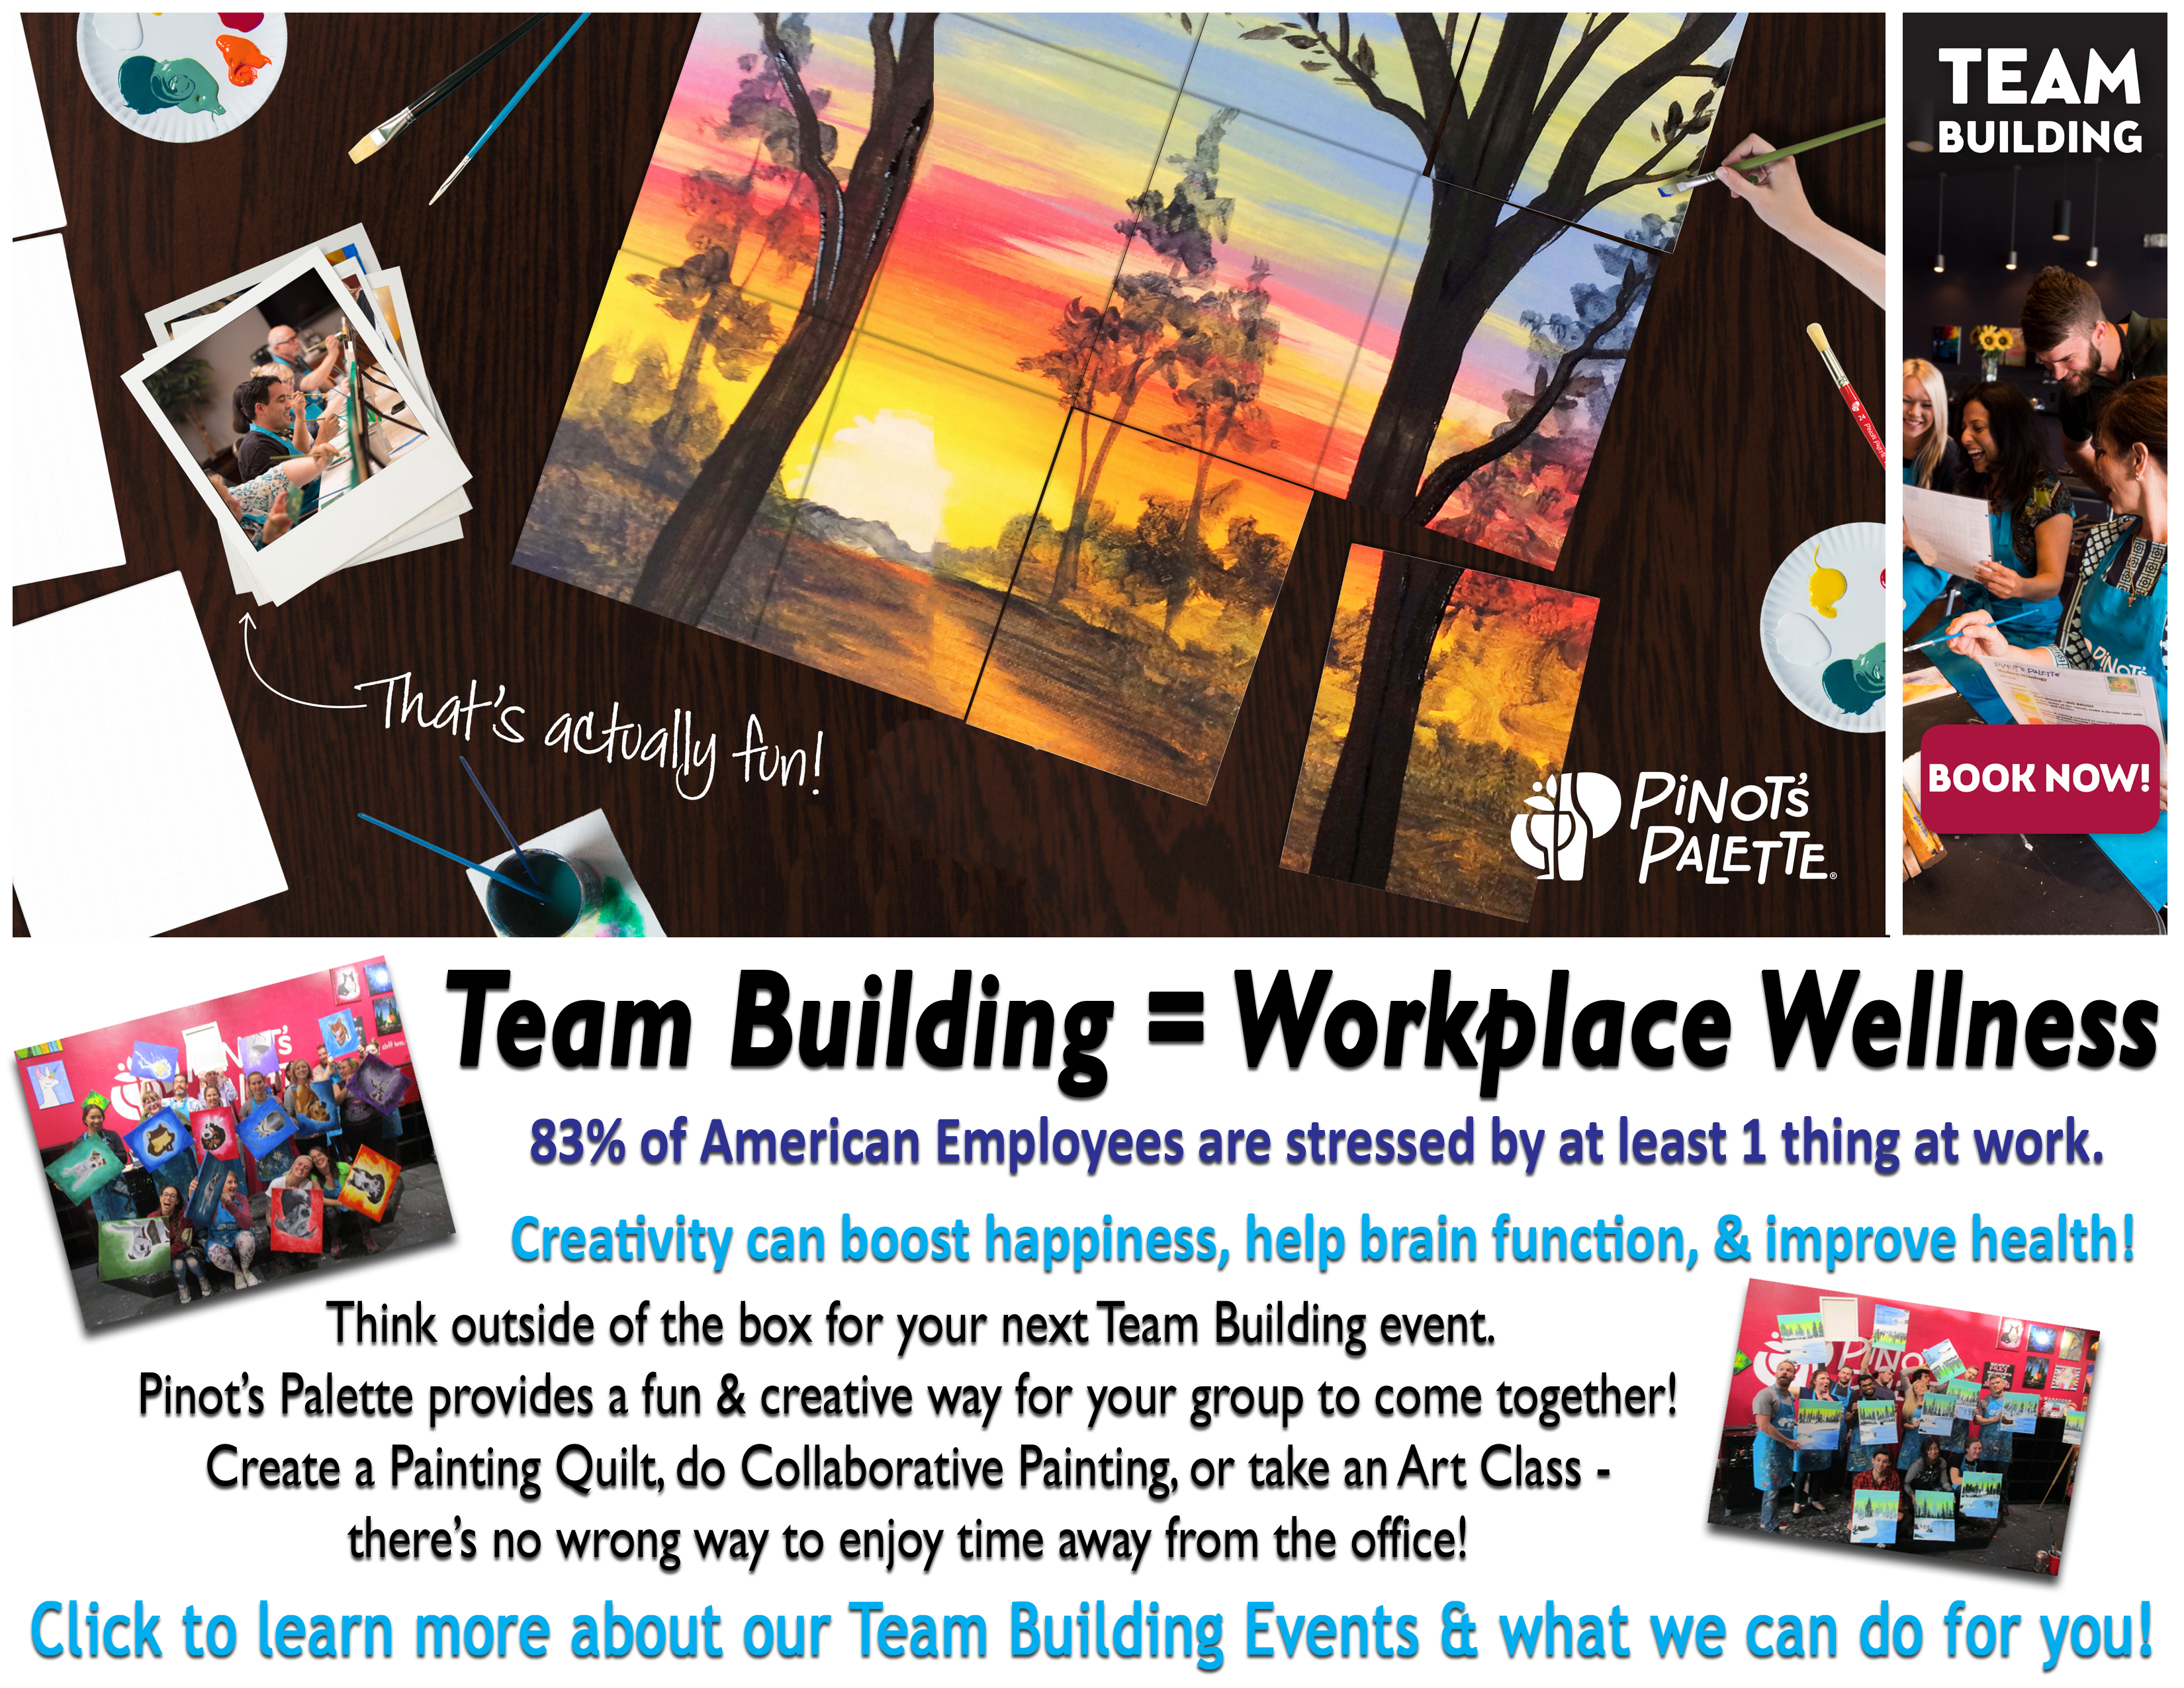 Team Building = Workplace Wellness! - Pinot's Palette